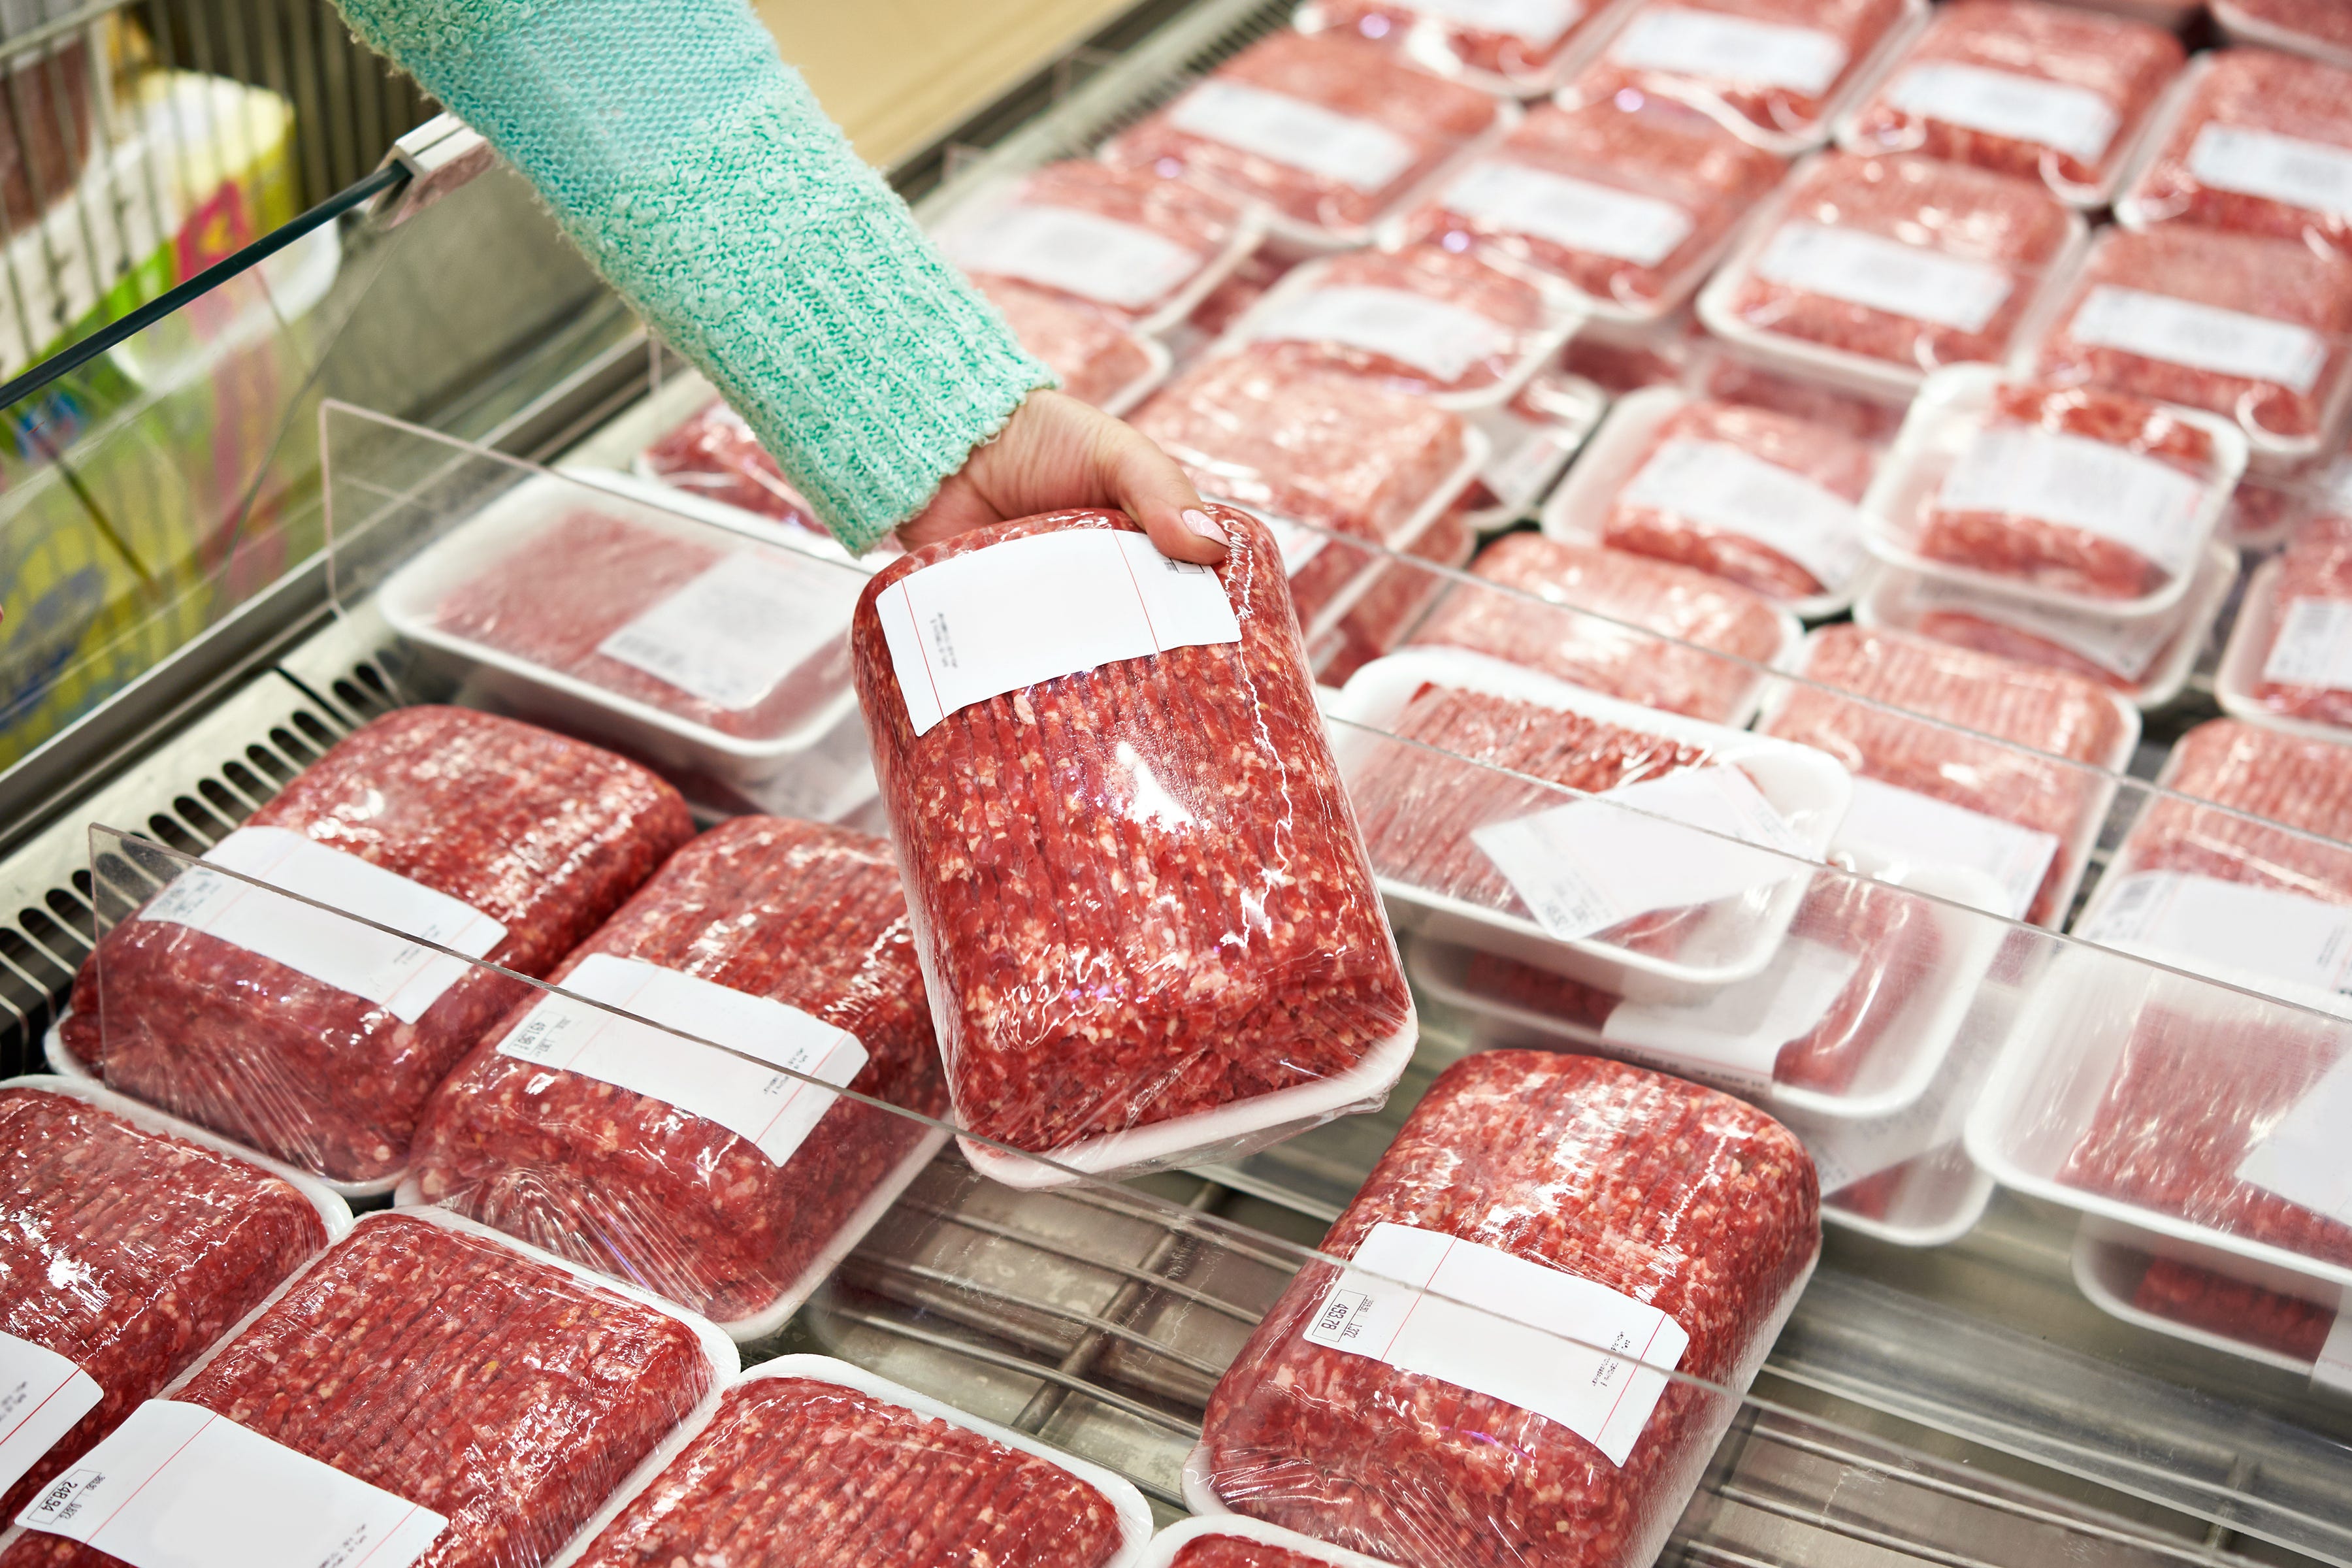 walmart ground beef recalled for potential e. coli contamination, 16,000 pounds affected